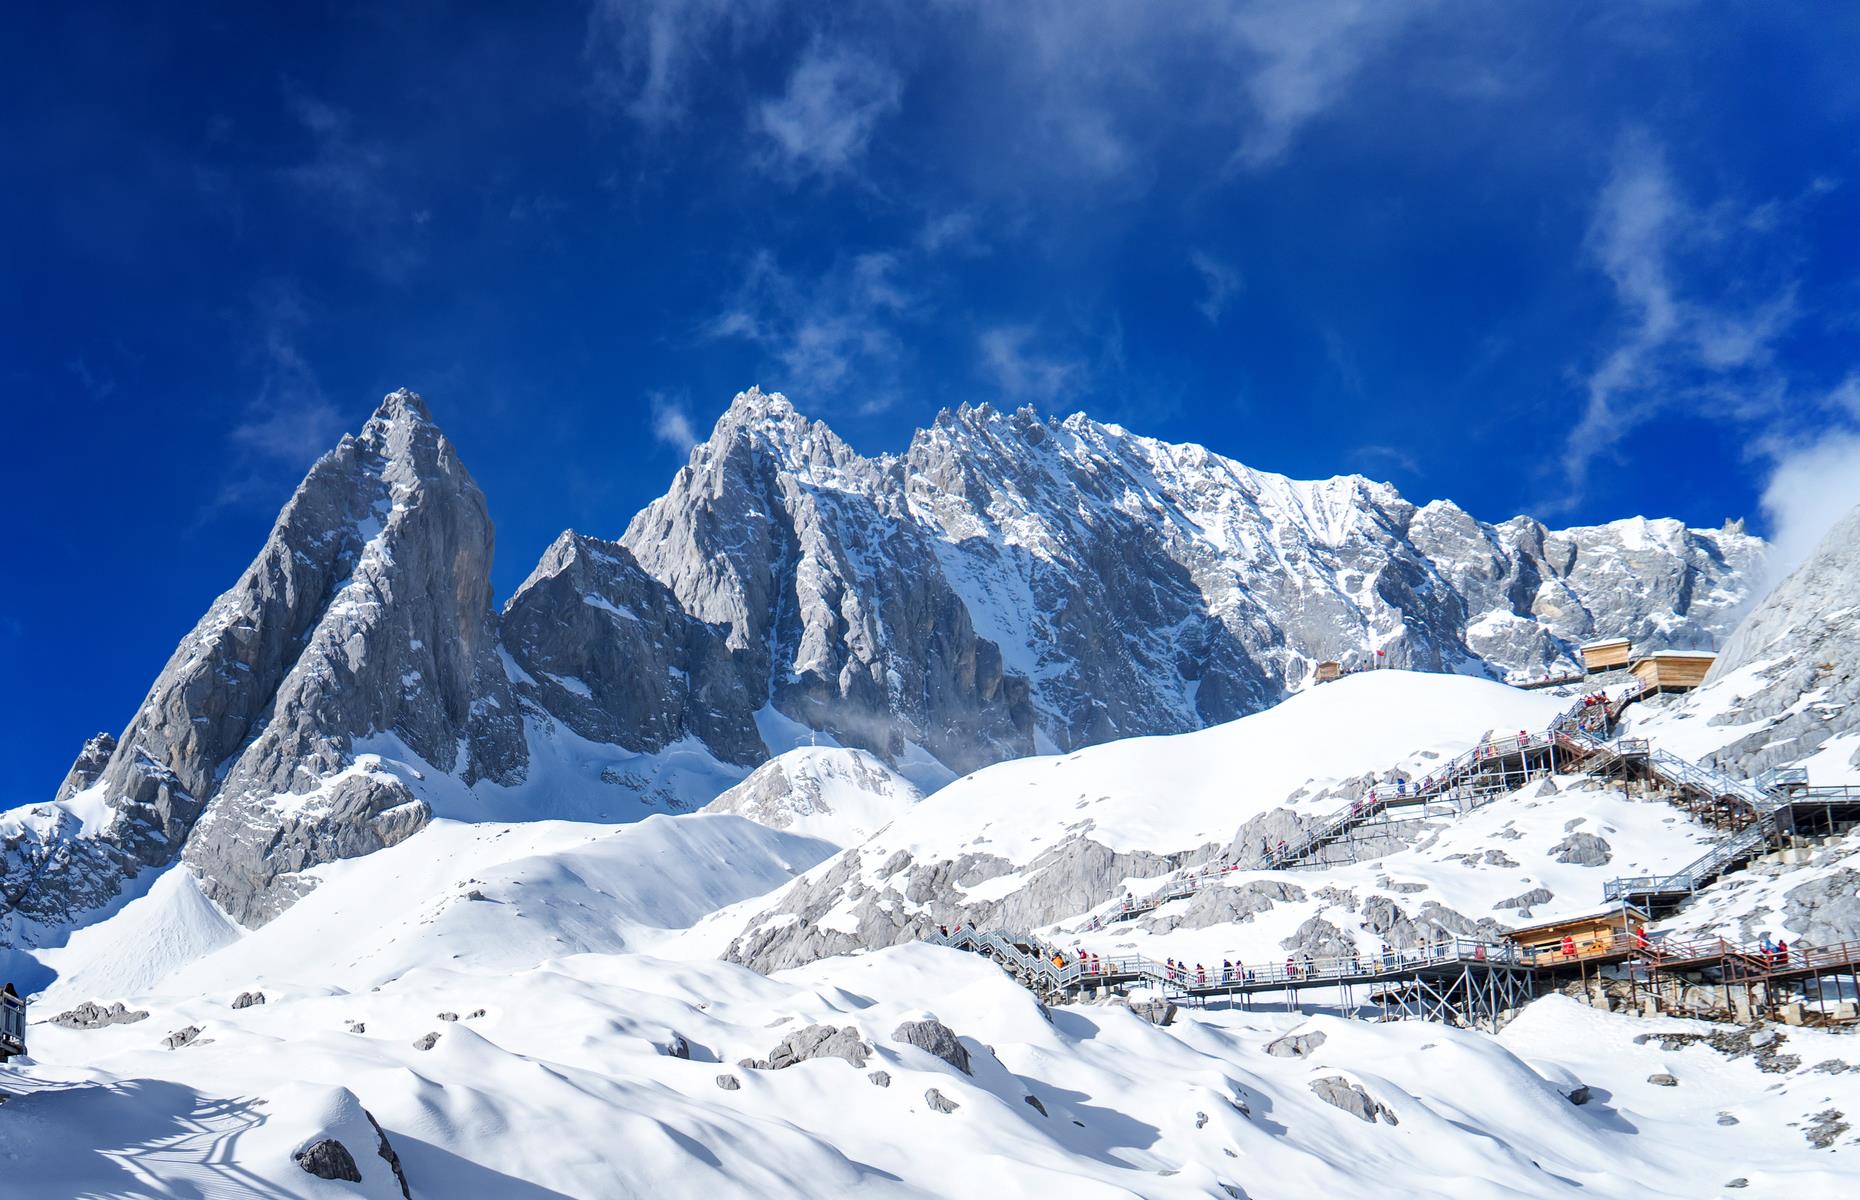 Stunning mountainous scenery and deep snow are on offer at Jade Dragon Snow Mountain in Lijiang within China's Yunnan province. Set at an elevation of 14,763-15,420 feet (4,500-4,700m) above sea level, it's the highest ski resort in the world. The dramatic mountain range, which consists of 13 peaks, is the southernmost glacier in the Northern Hemisphere.